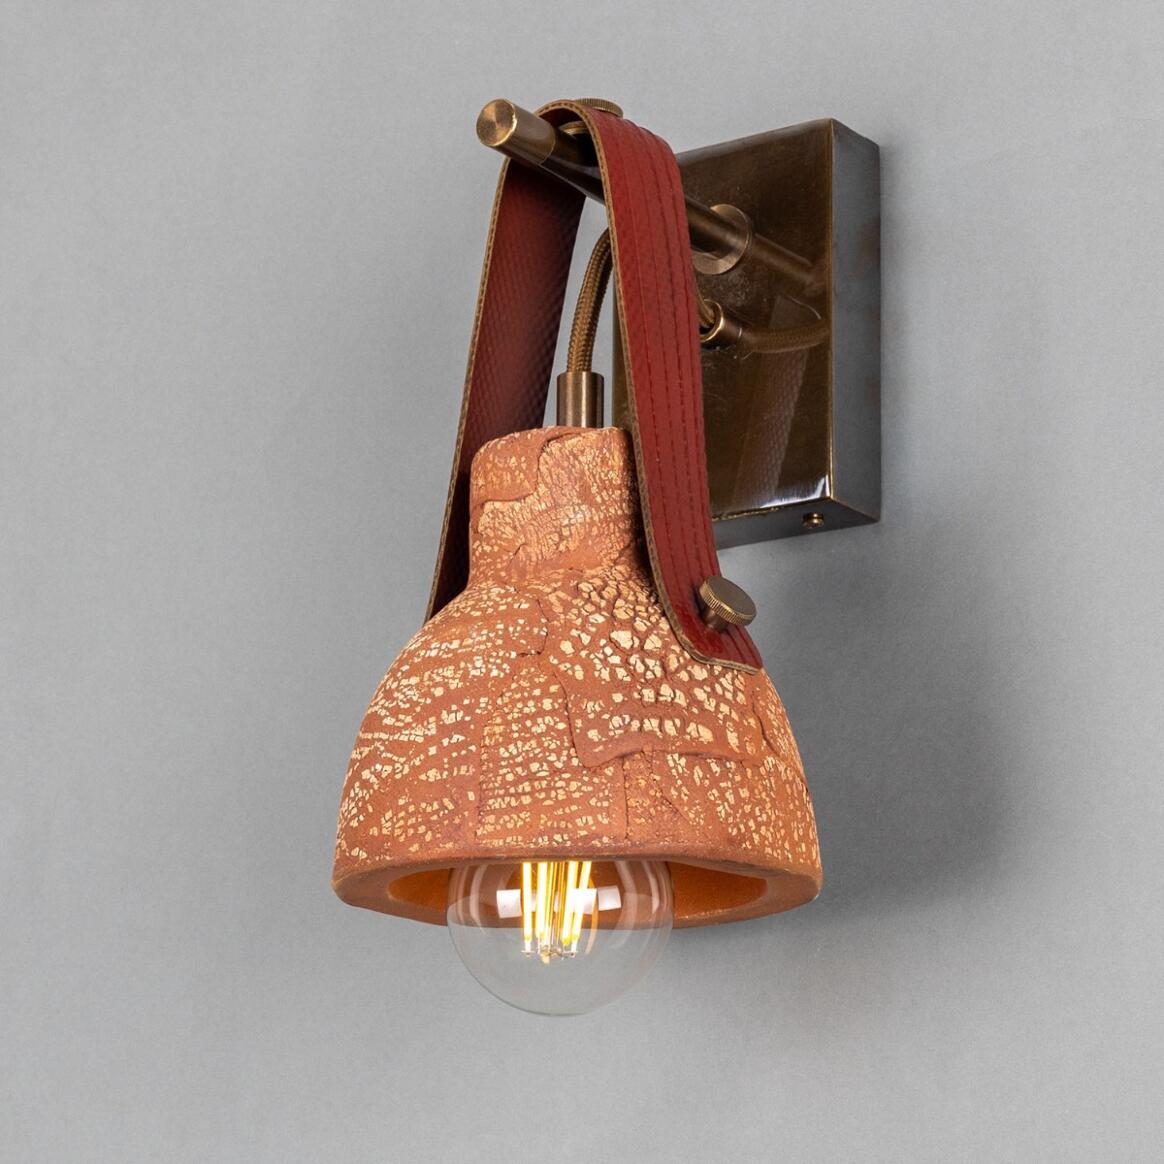 Nagi Organic Ceramic Wall Light with Rescued Fire-Hose Strap, Red Iron main product image